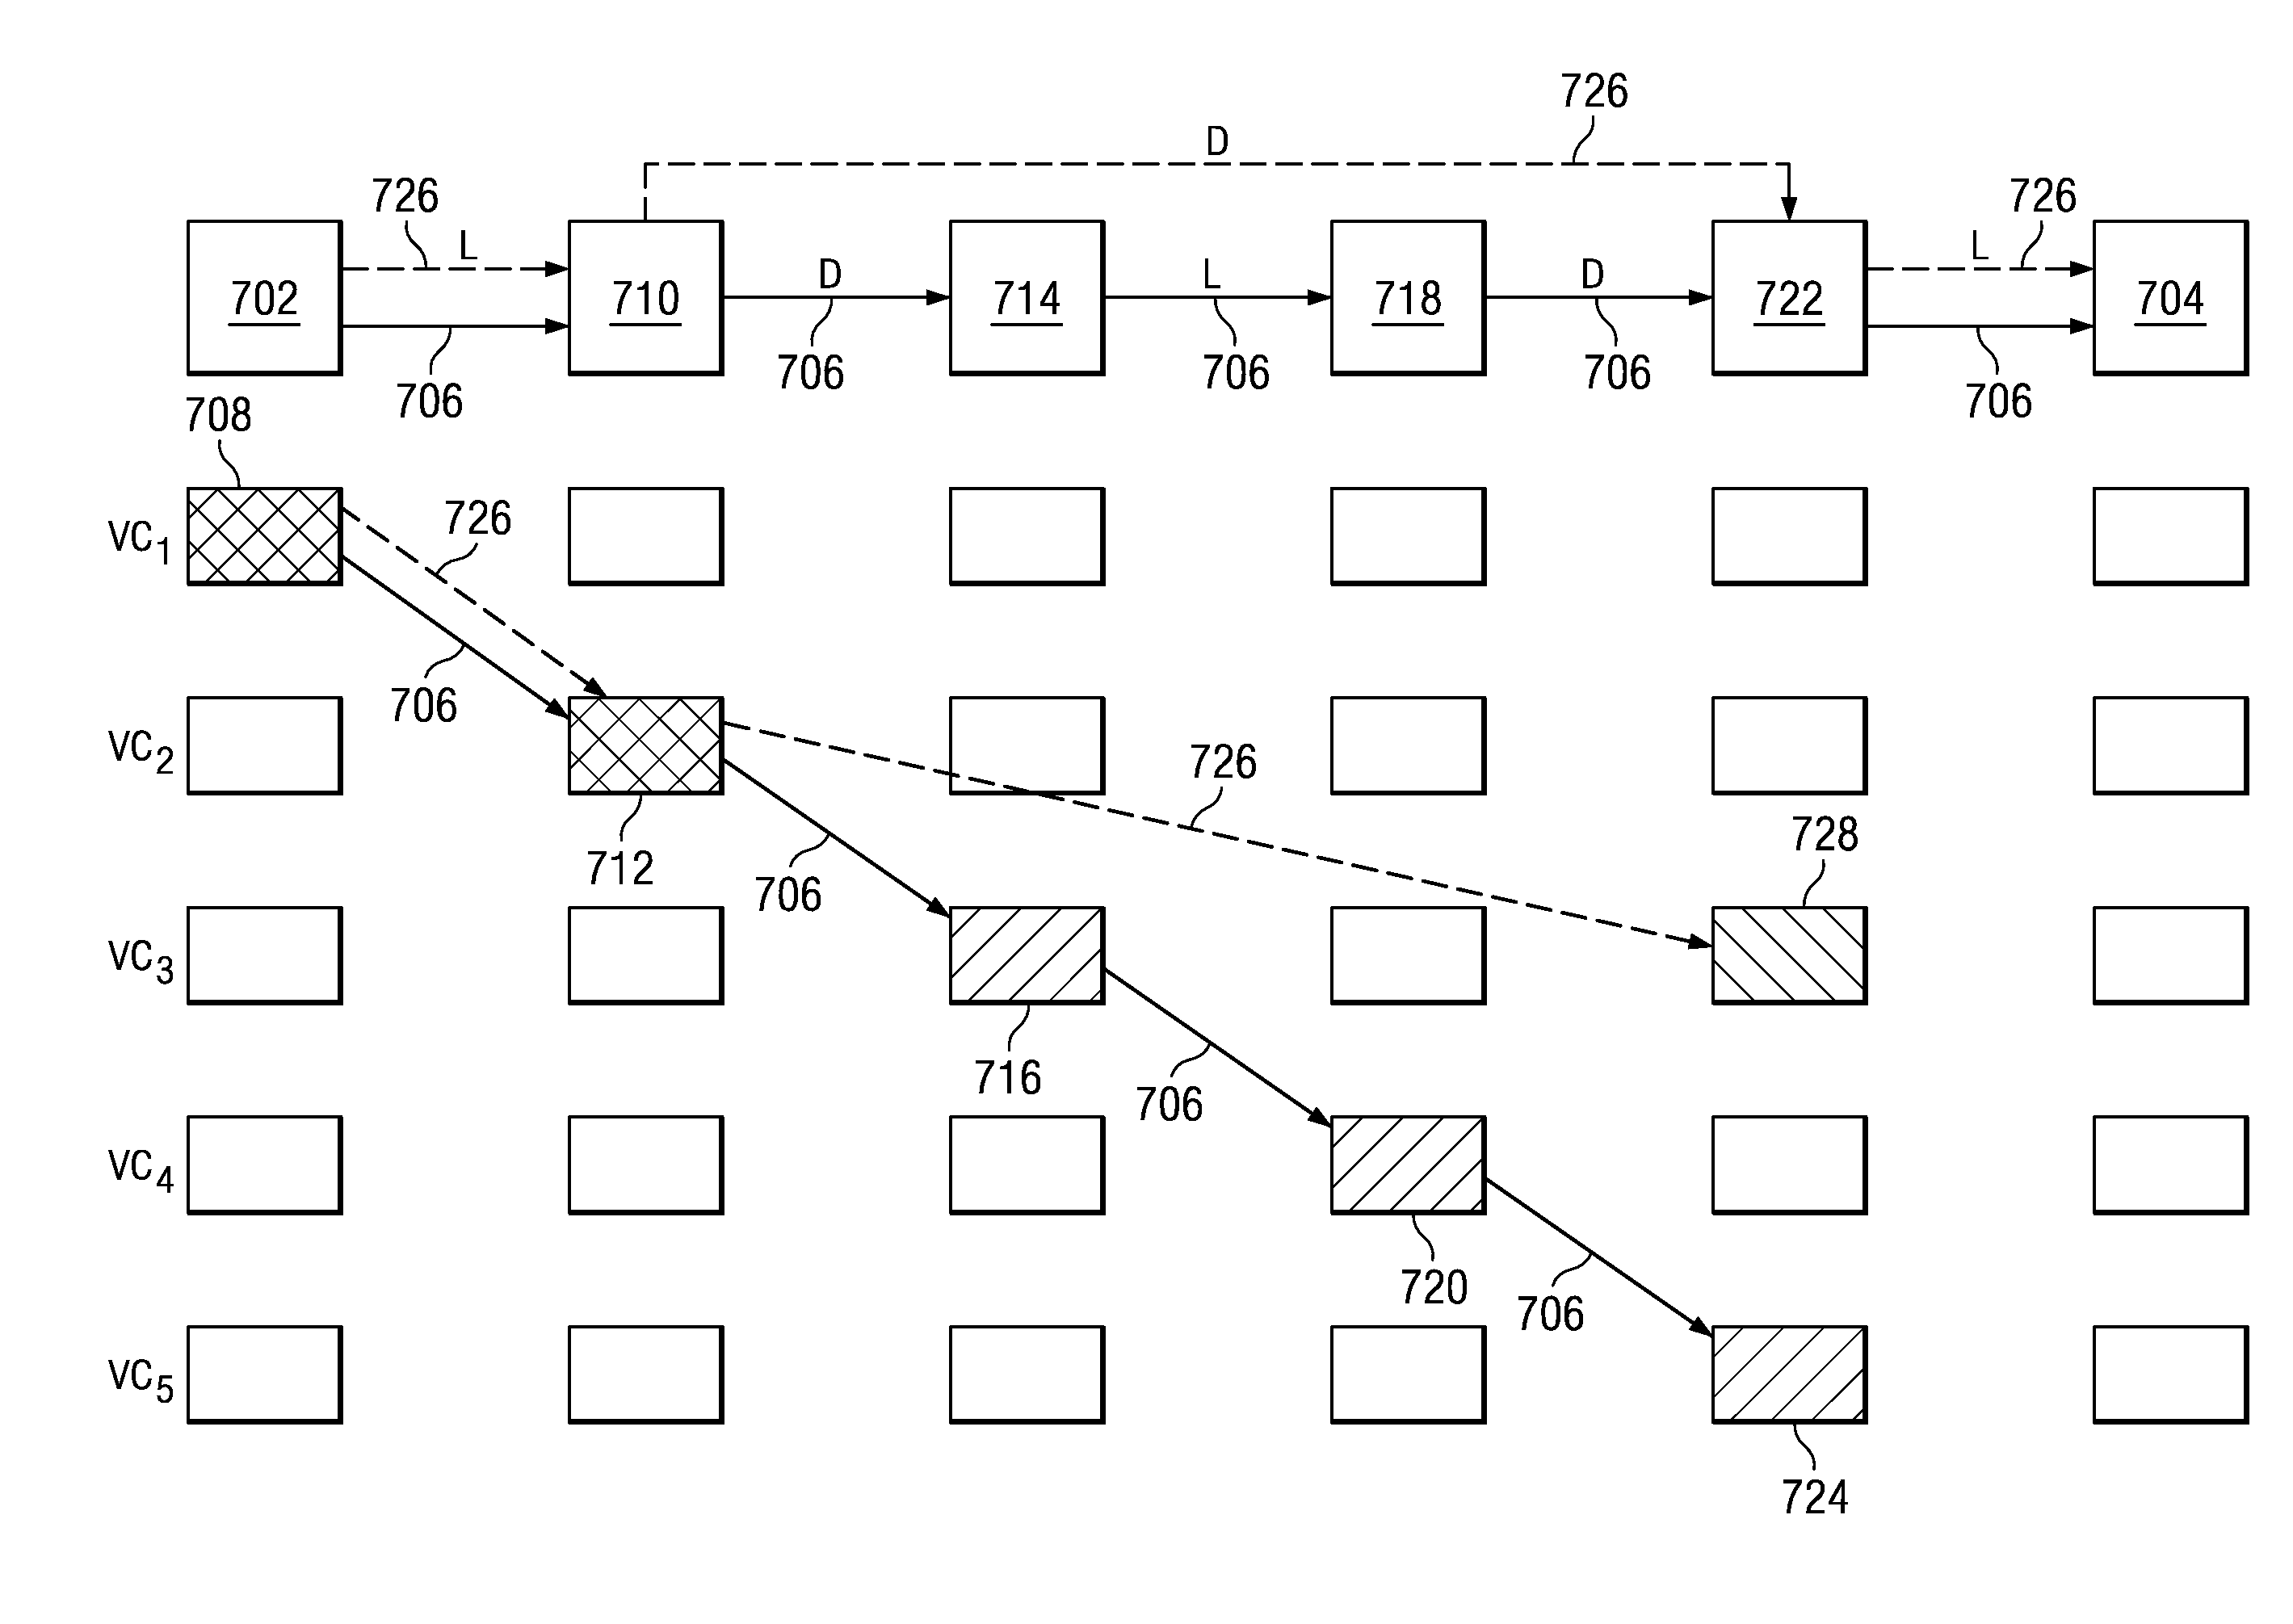 Direct/indirect transmission of information using a multi-tiered full-graph interconnect architecture